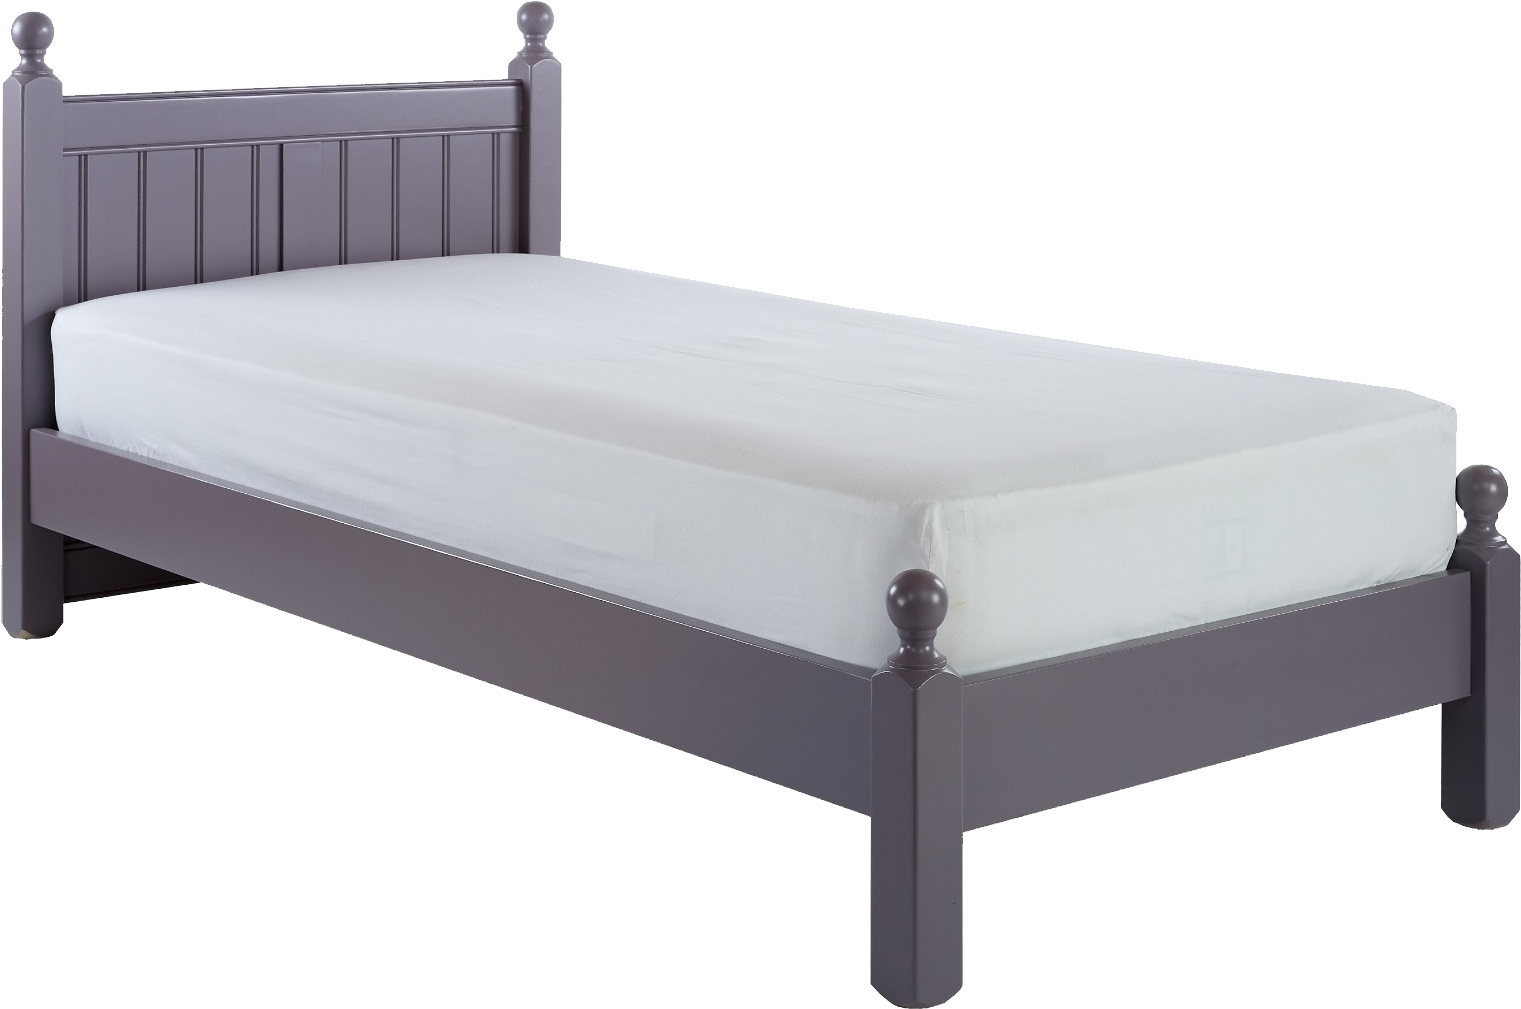 Transparant bed